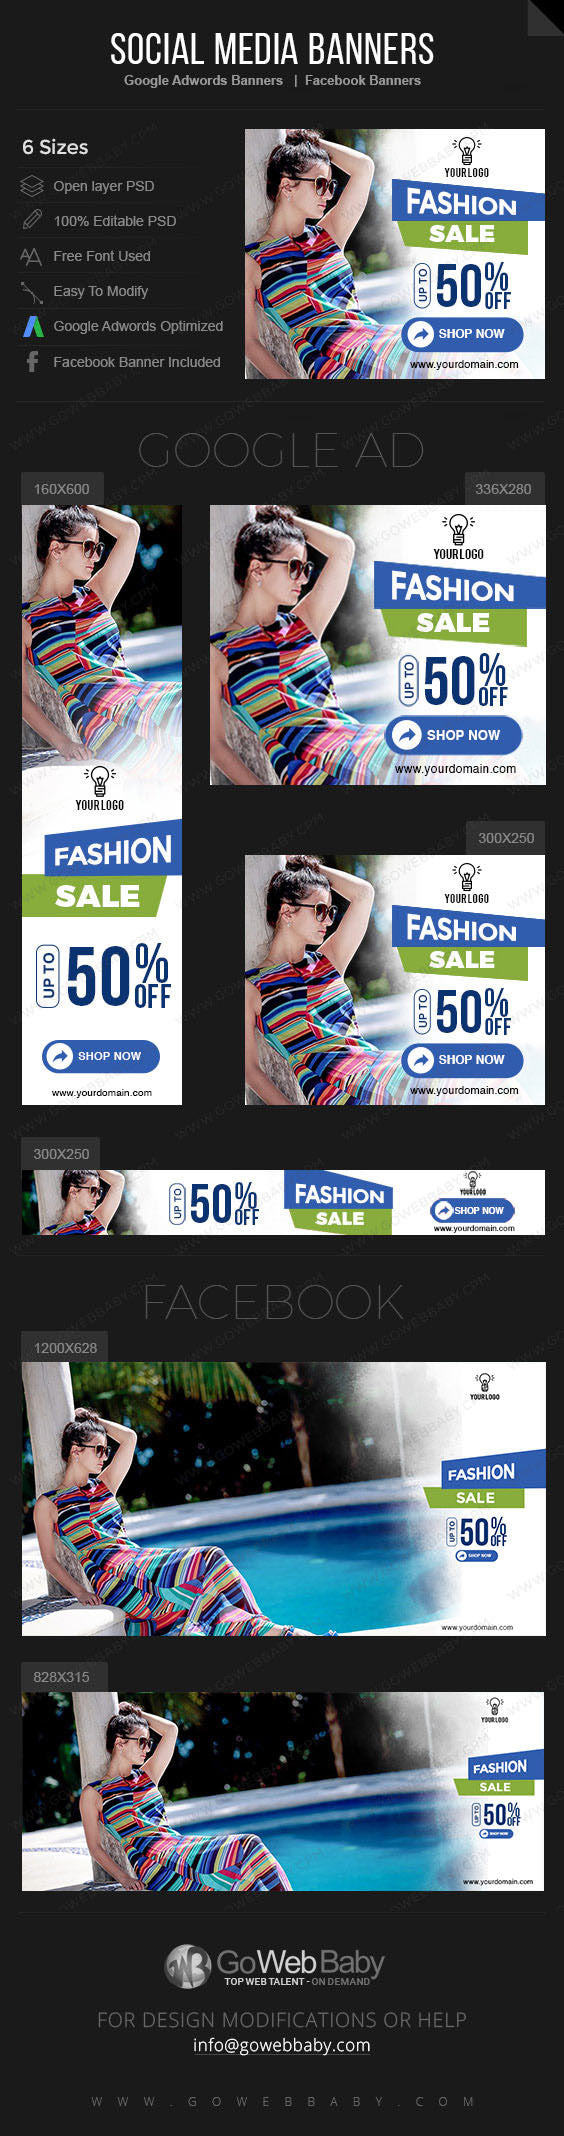 Google Adwords Display Banner with Facebook banners -Fashion Store for Website Marketing - GoWebBaby.Com